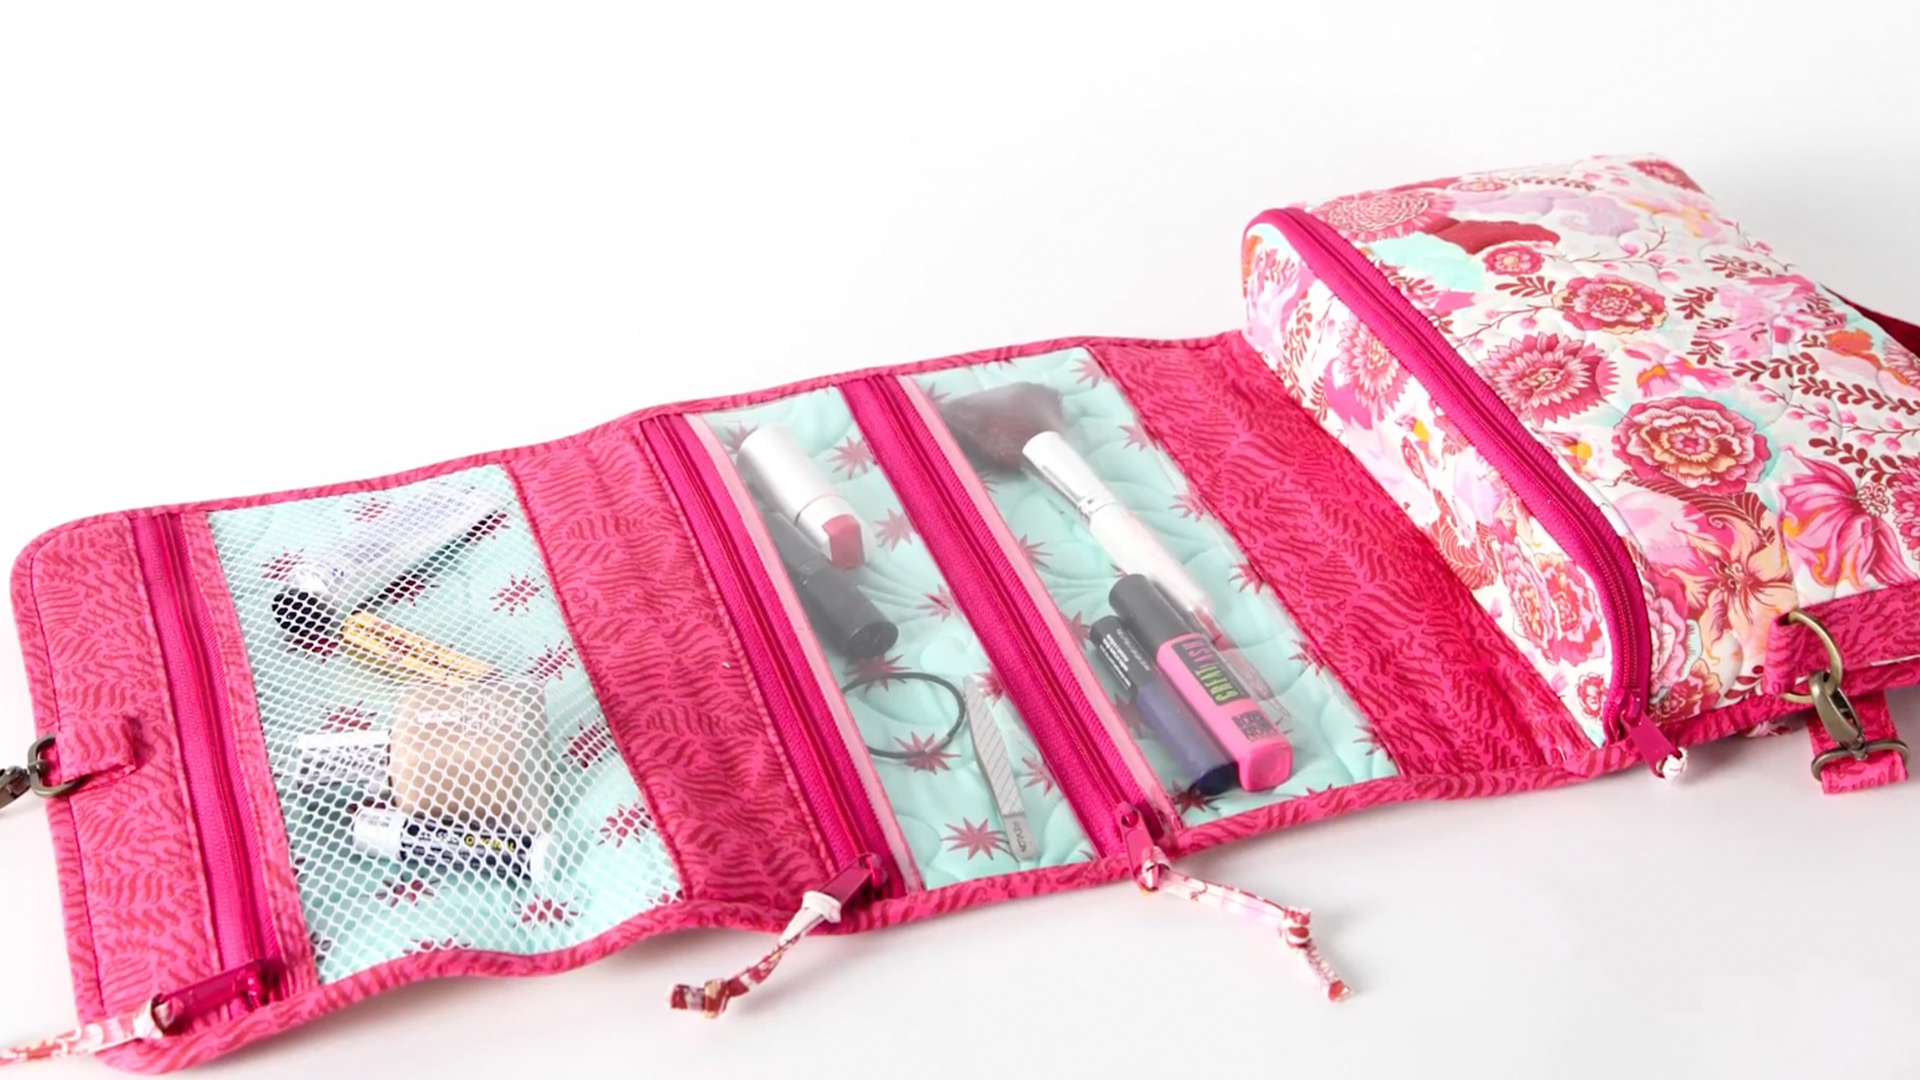 Hanging Cosmetics Bag | Annie Unreinarticle featured image thumbnail.